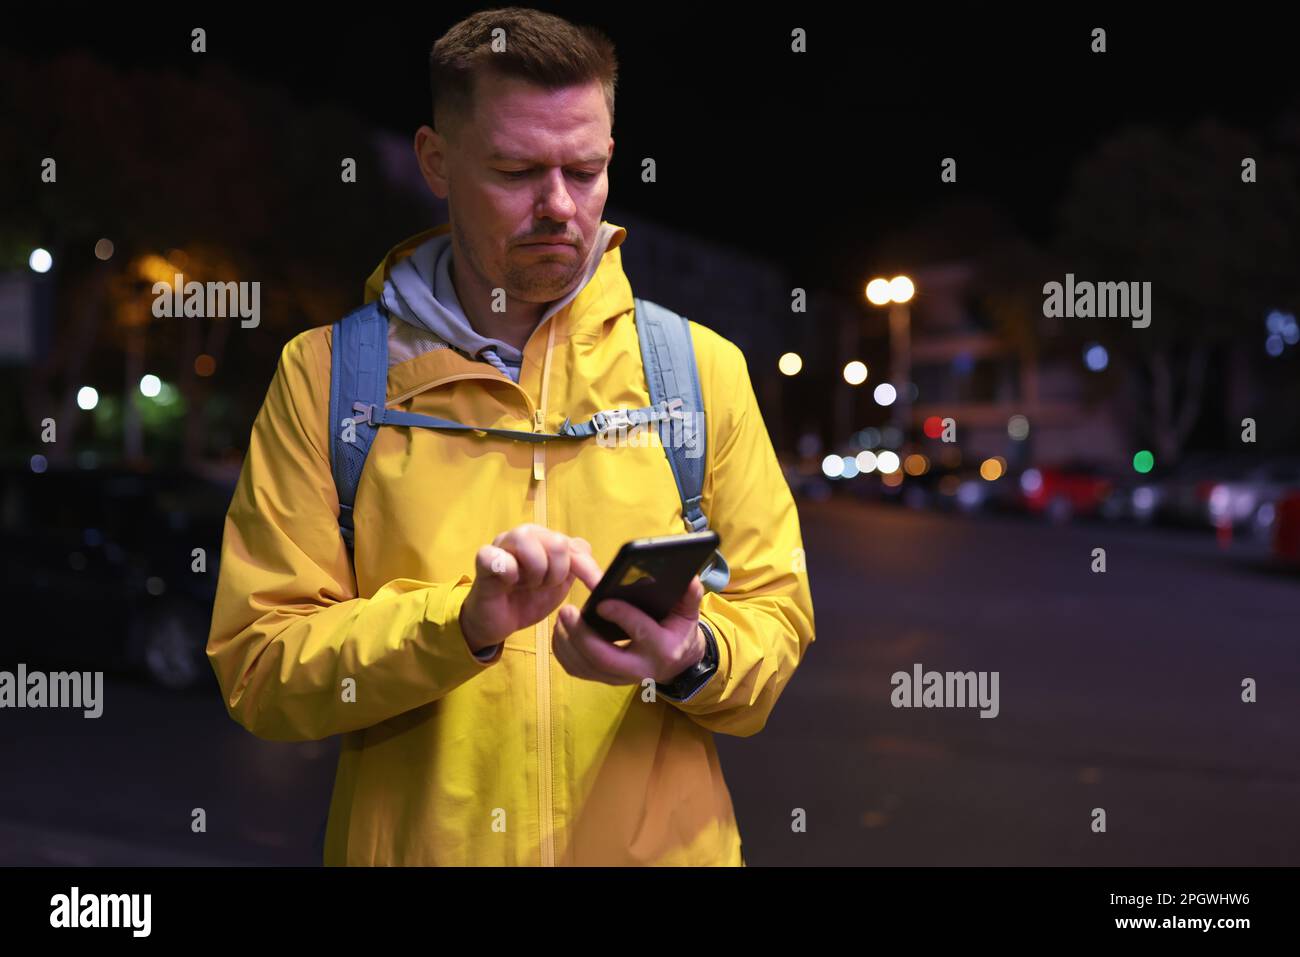 Doubting man in yellow jacket uses phone in night city Stock Photo